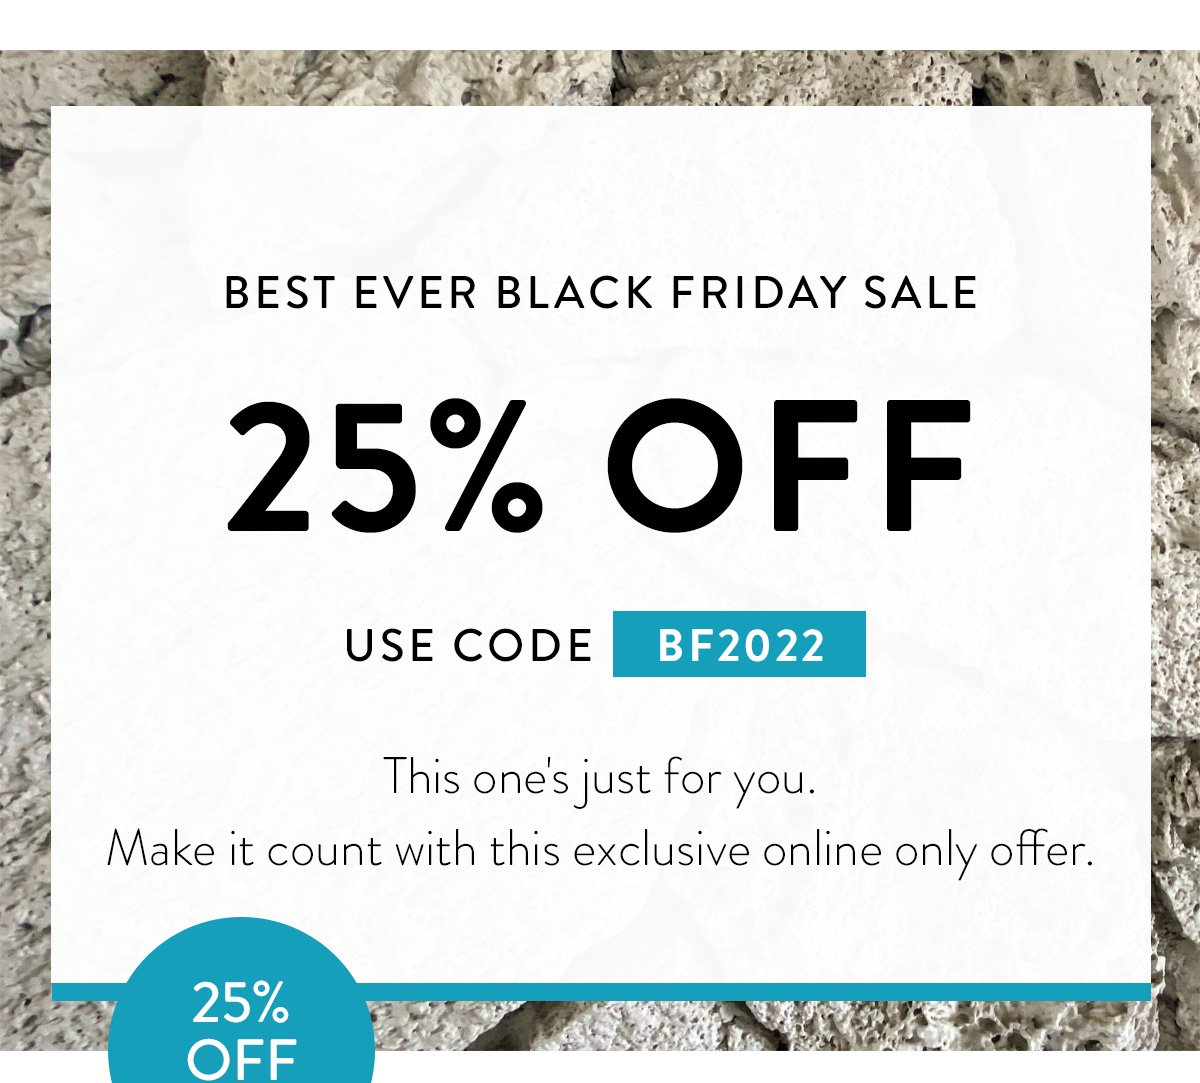 BEST EVER BLACK FRIDAY SALE / 25% OFF / USE CODE BF2022 / This one's just for you. Make it count with this exclusive online only offer.